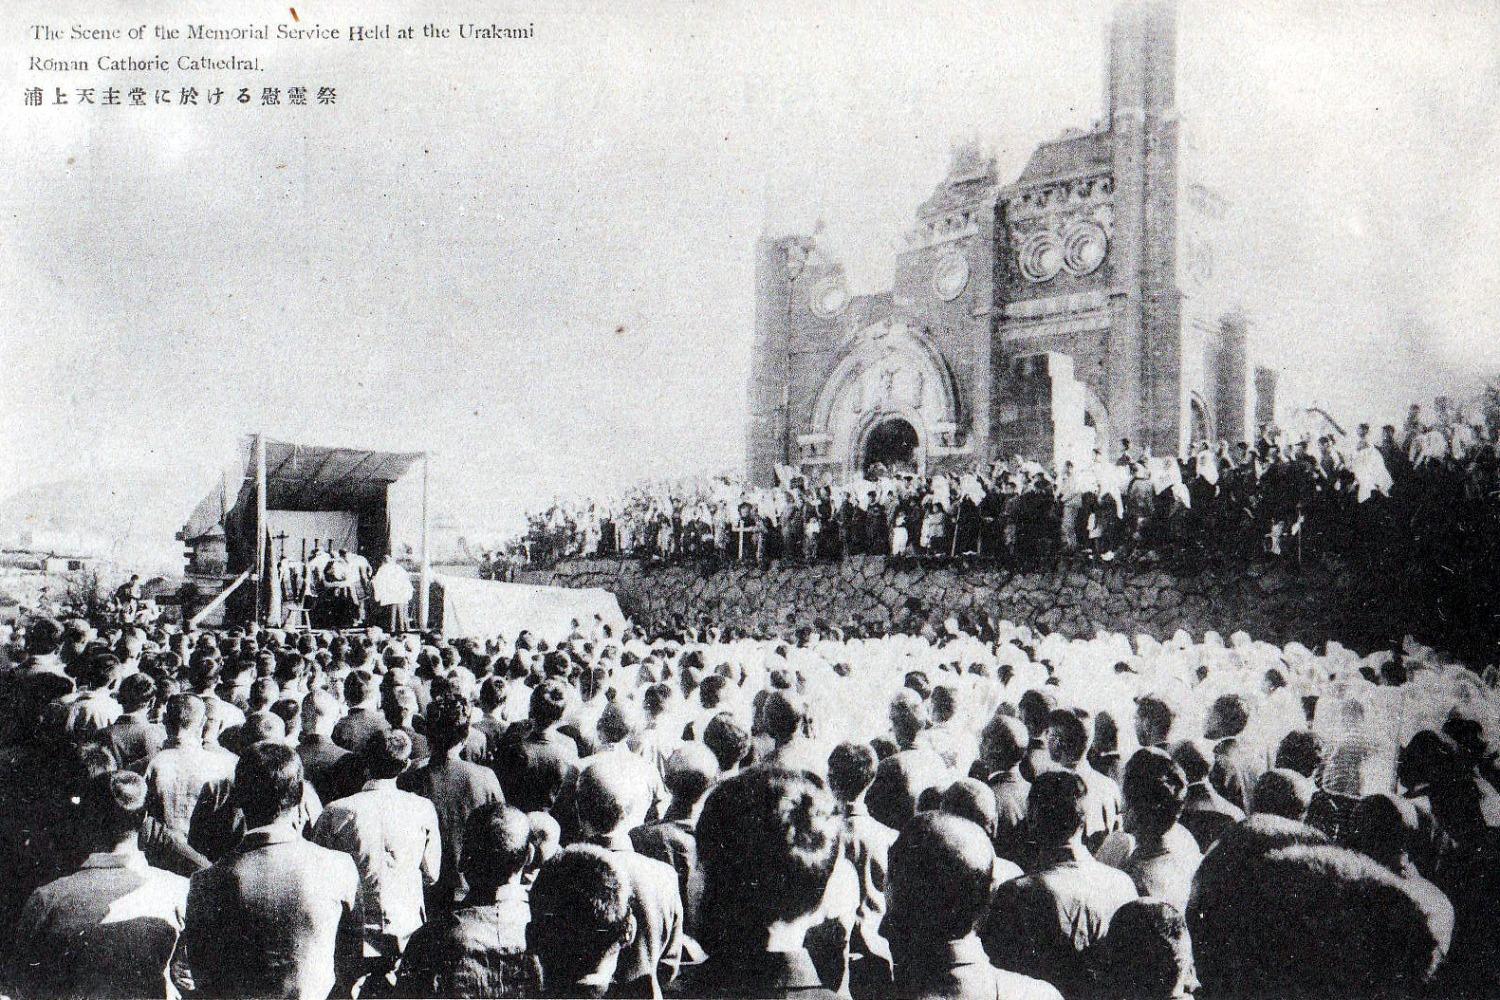 Mass held outside the ruins of Urakami Cathedral after the bombing of Nagasaki